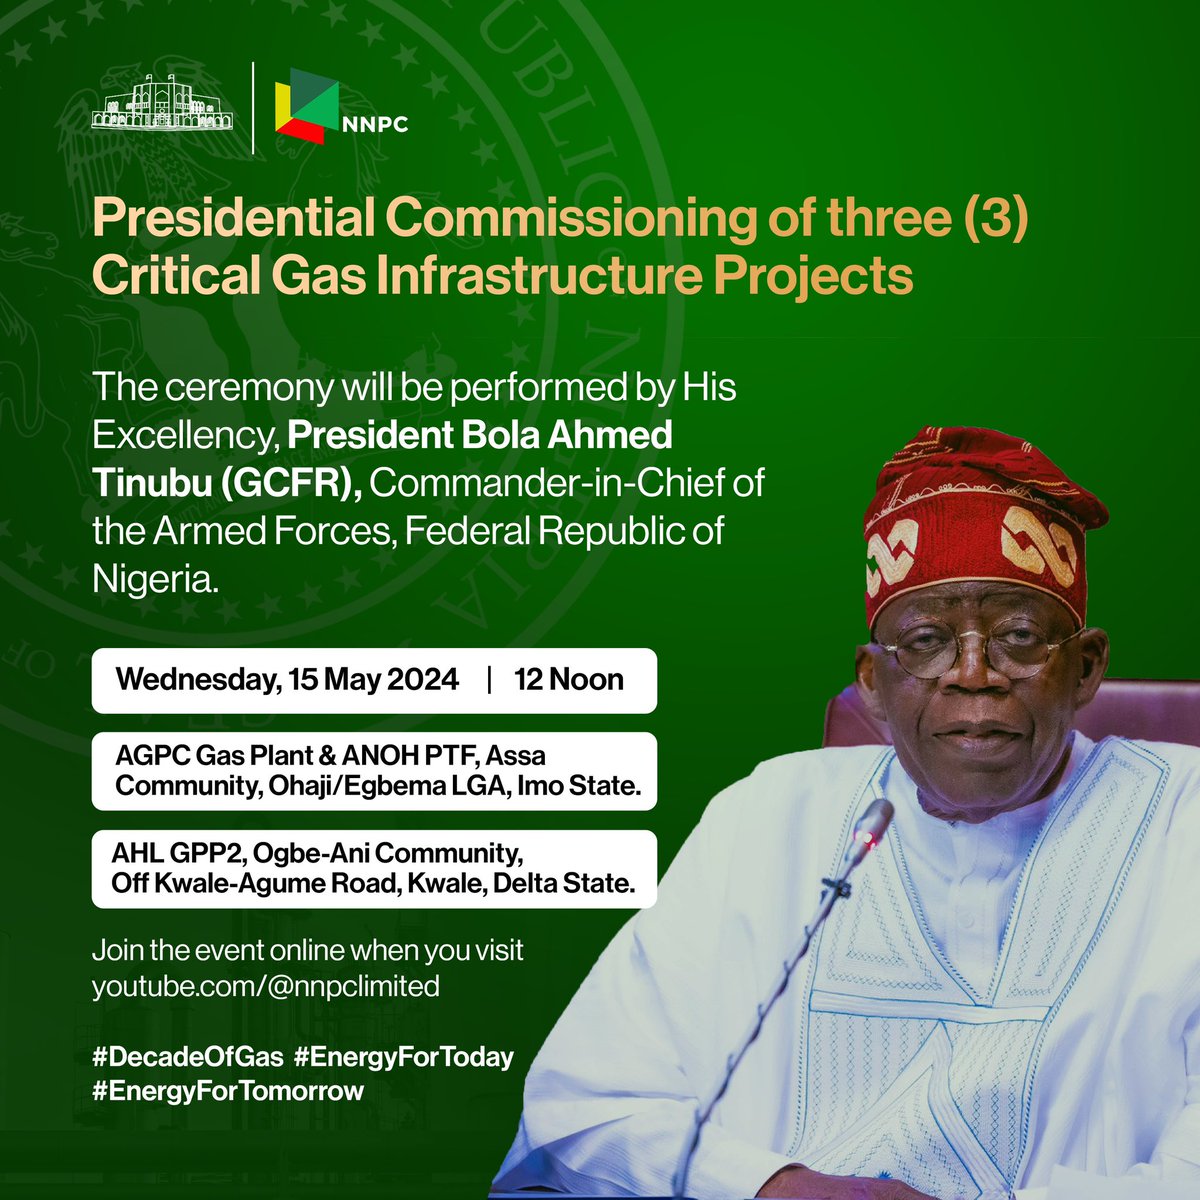 Presidential Commissioning of three (3) Critical Gas Infrastructure Projects The ceremony will be performed by His Excellency, President Bola Ahmed Tinubu (GCFR), Commander-in-Chief of the Armed Forces, Federal Republic of Nigeria. Date: Wednesday, 15 May 2024 Time: From 12…